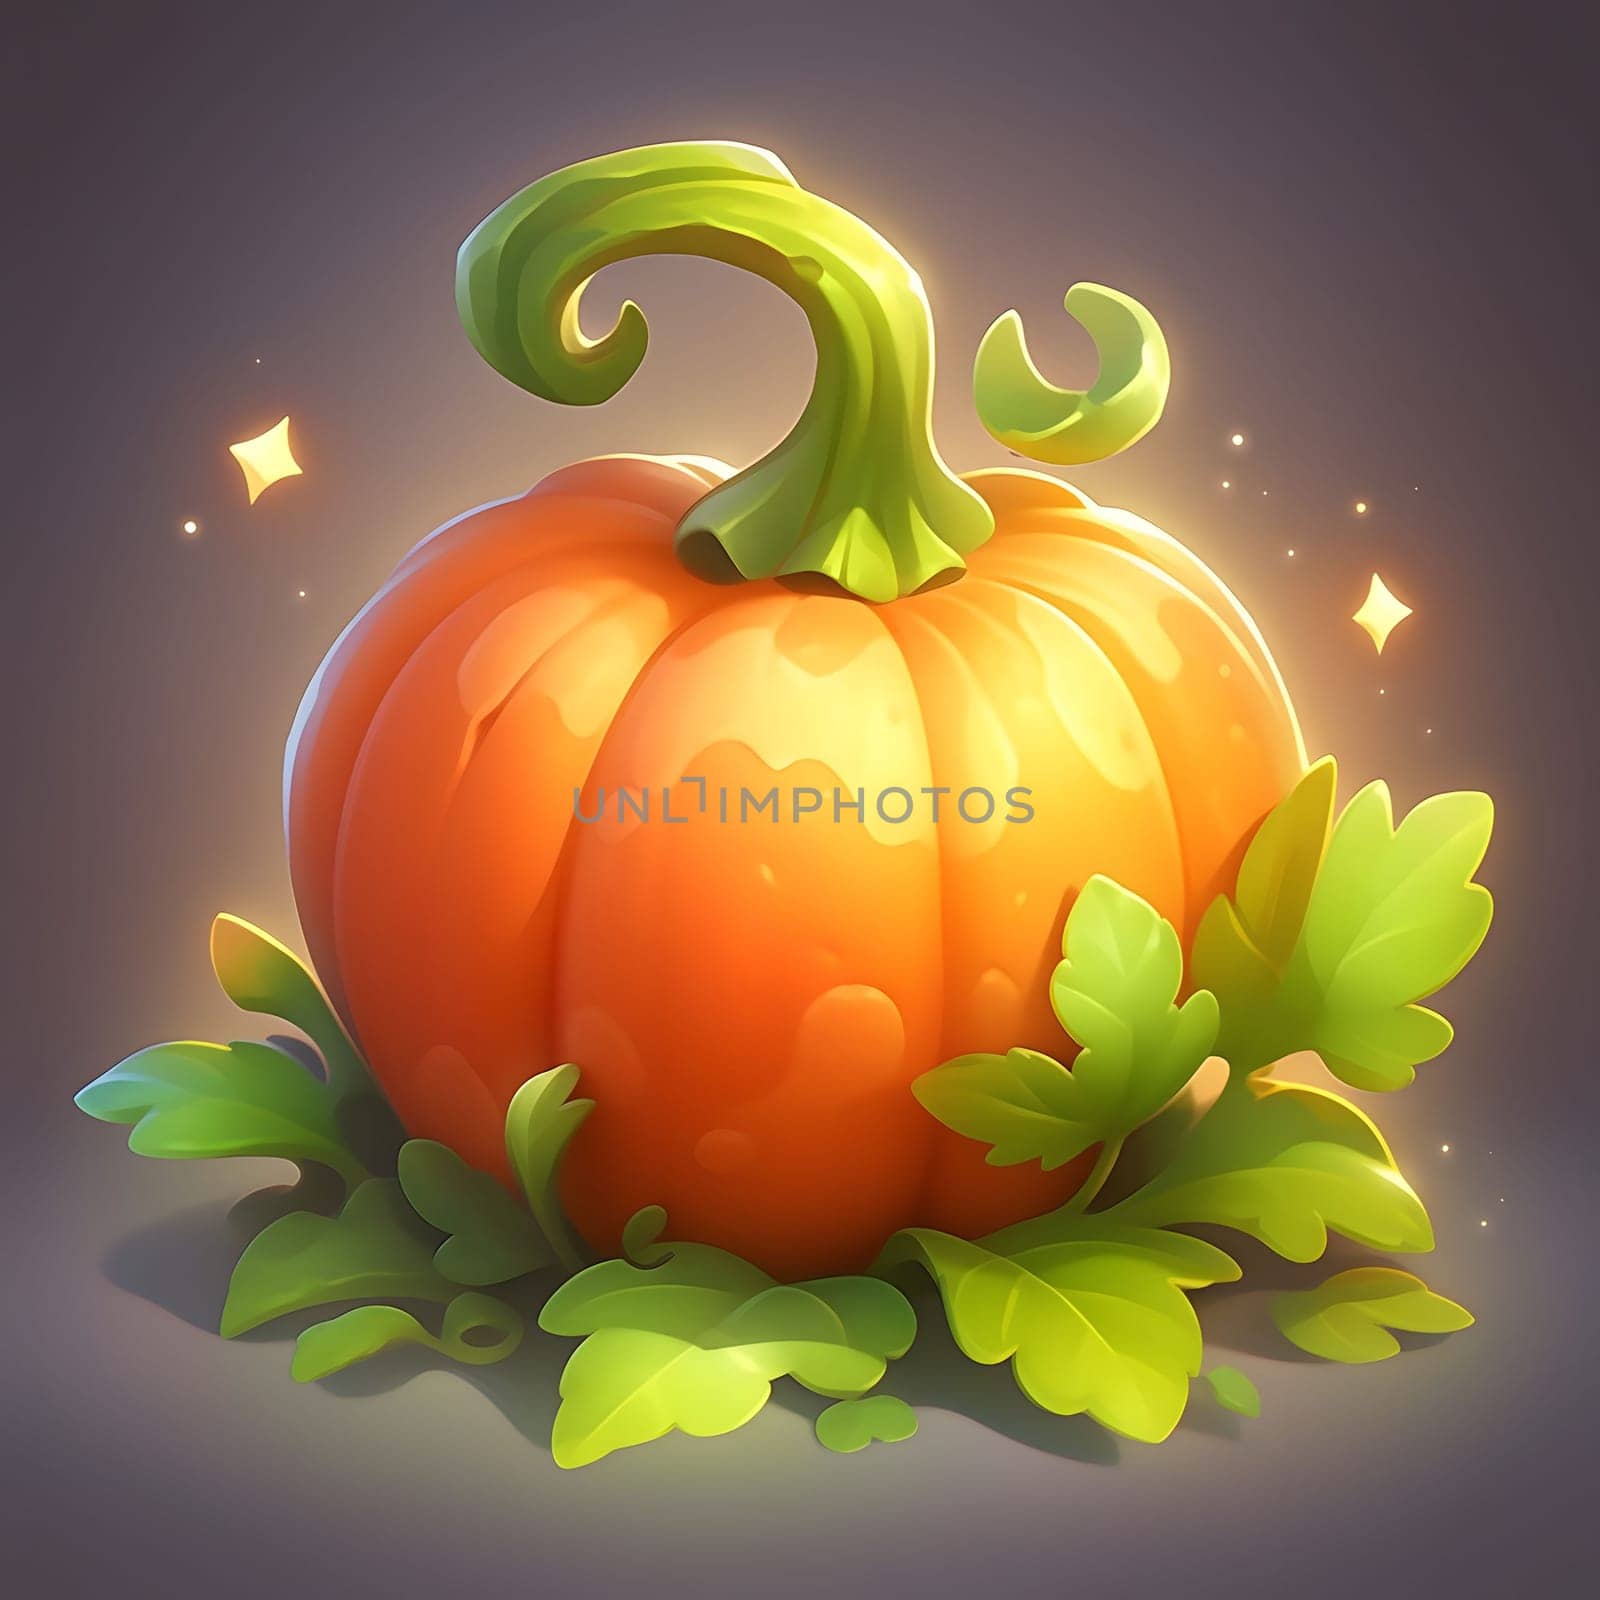 Fairy tale illustration of a pumpkin with leaves on a dark background. Pumpkin as a dish of thanksgiving for the harvest. by ThemesS